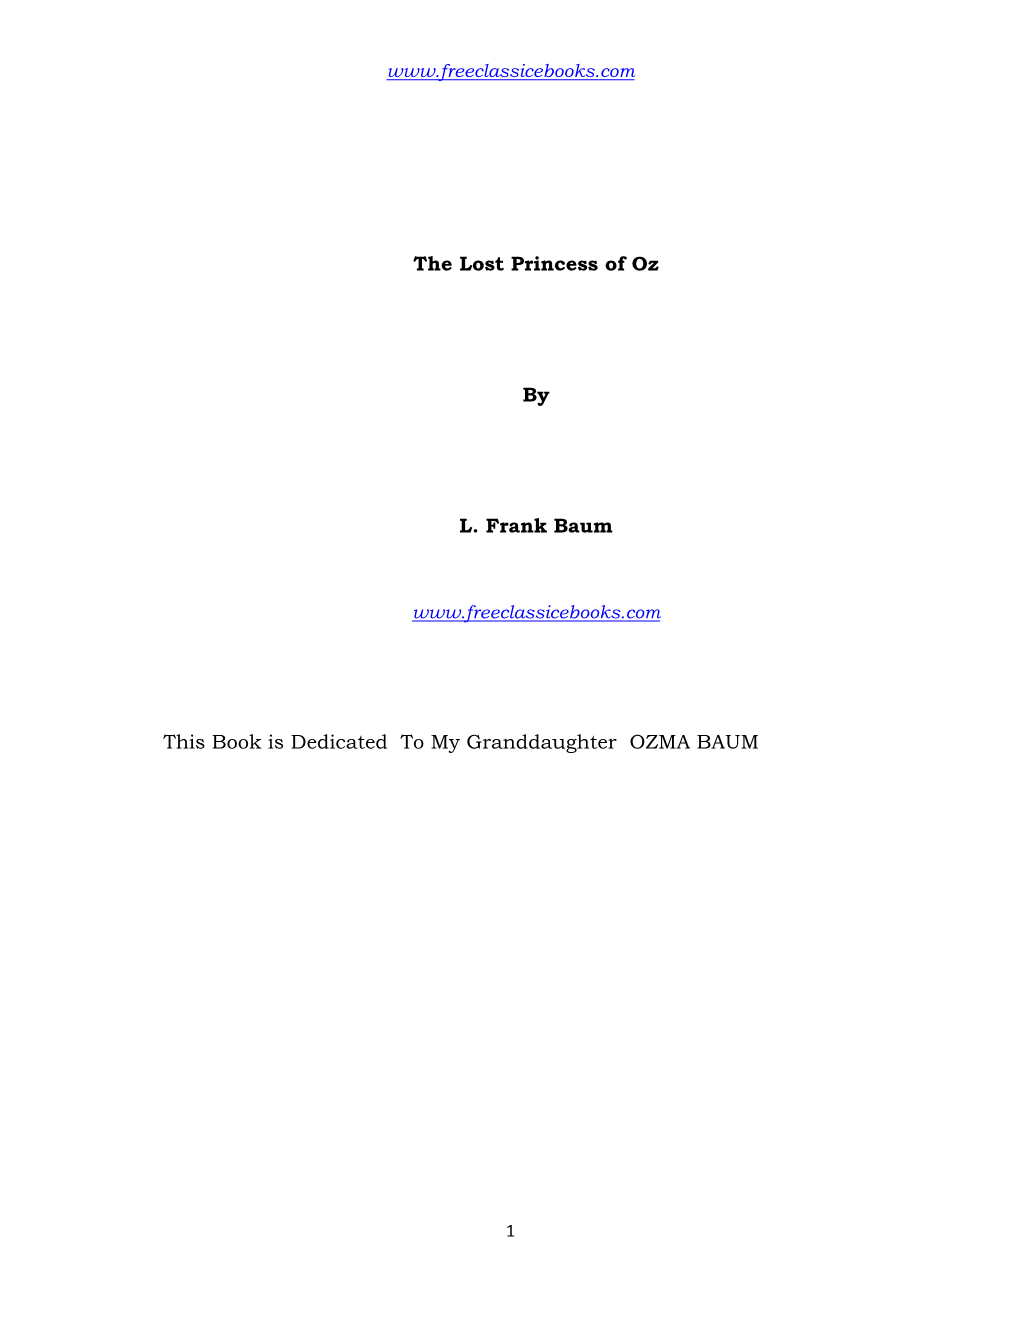 The Lost Princess of Oz by L. Frank Baum This Book Is Dedicated To